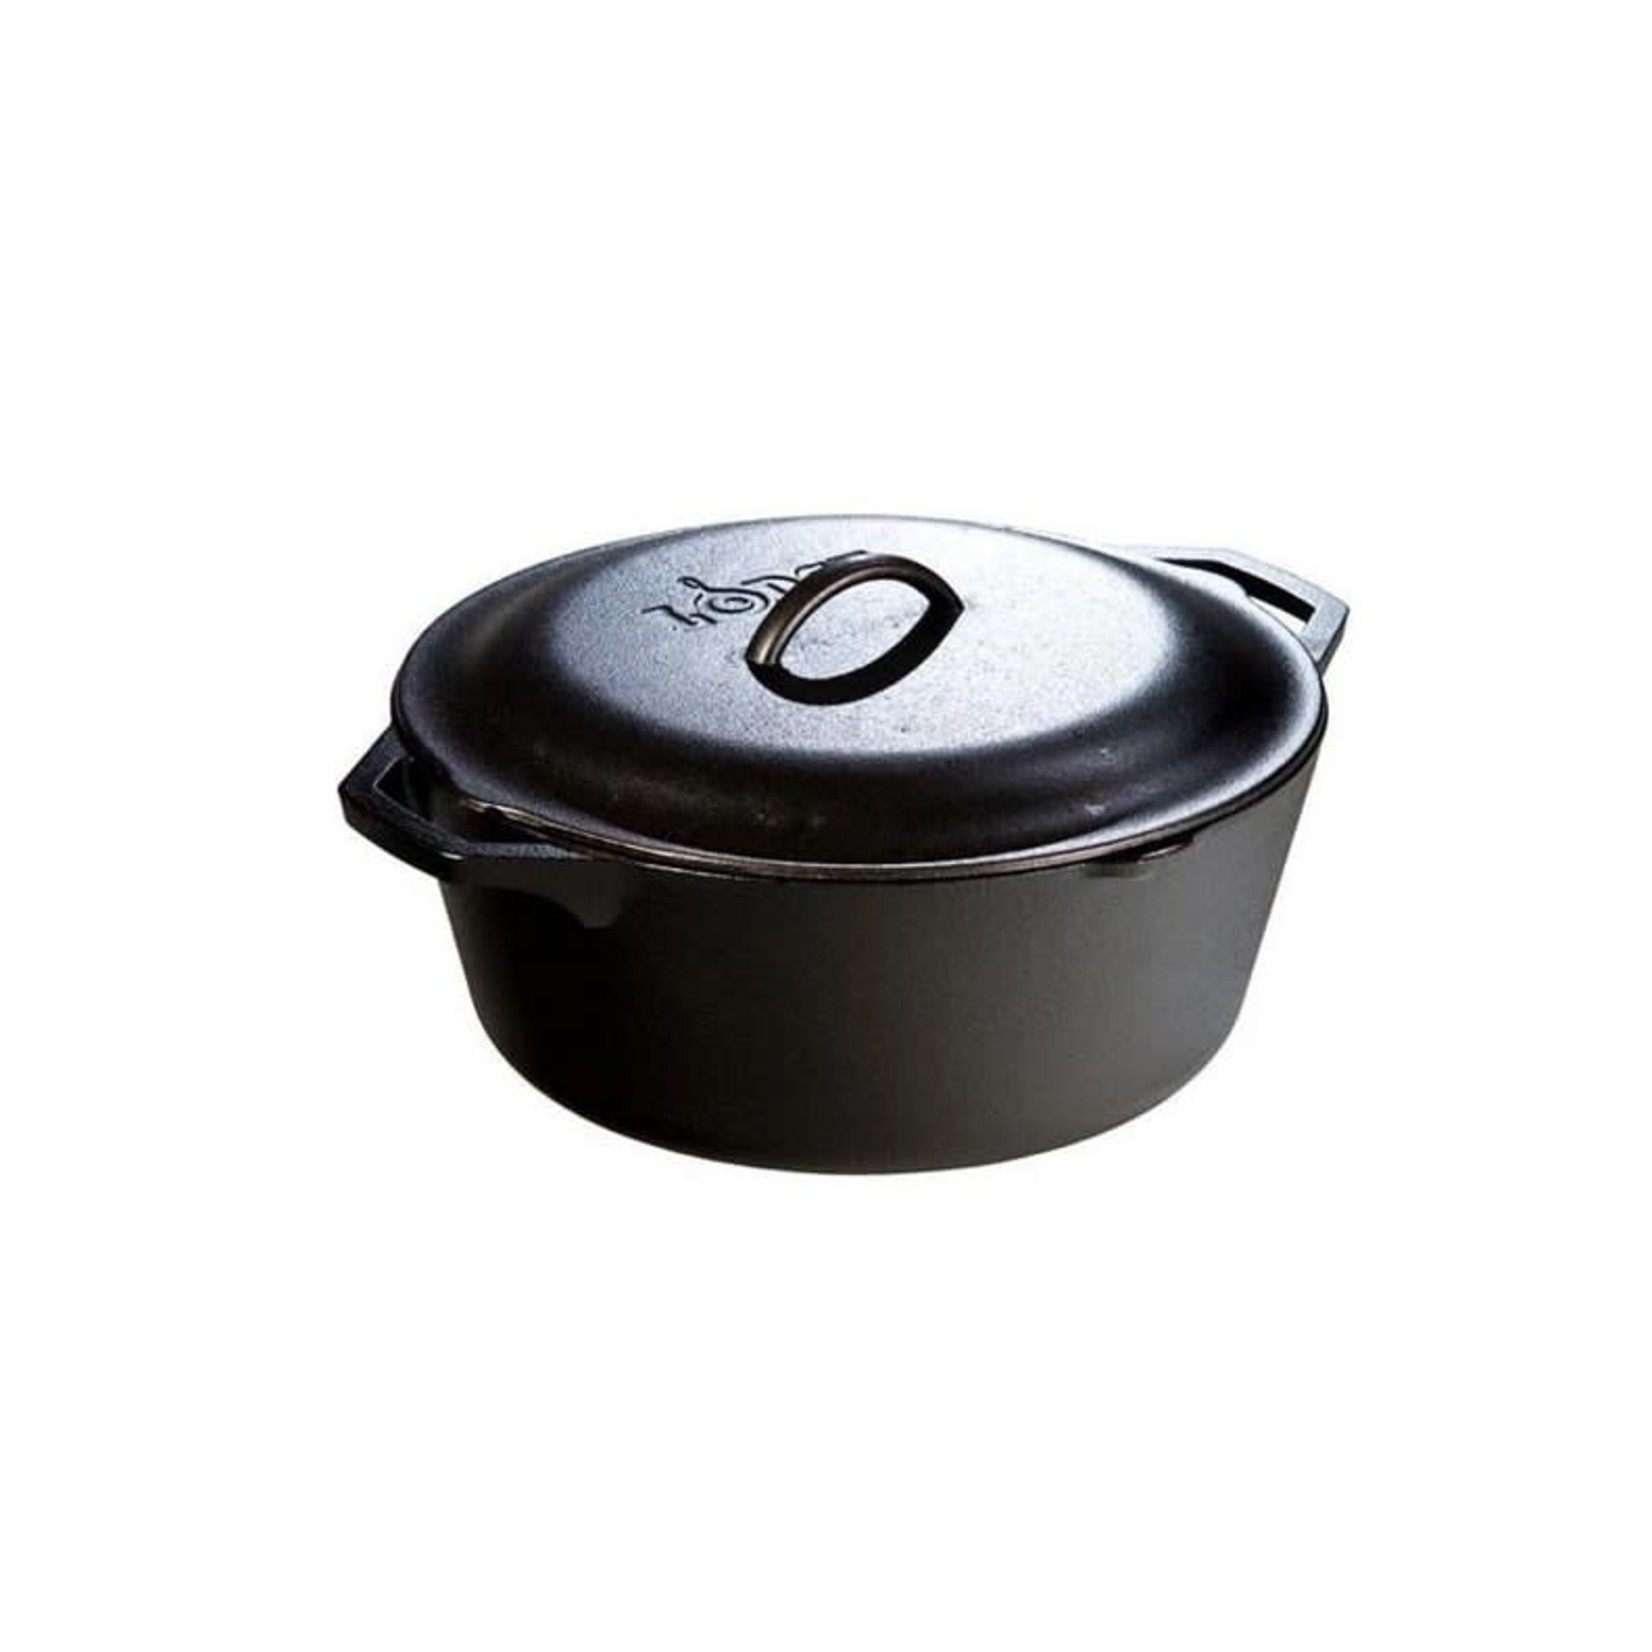 LODGE Dutch Oven with Cover 5qt